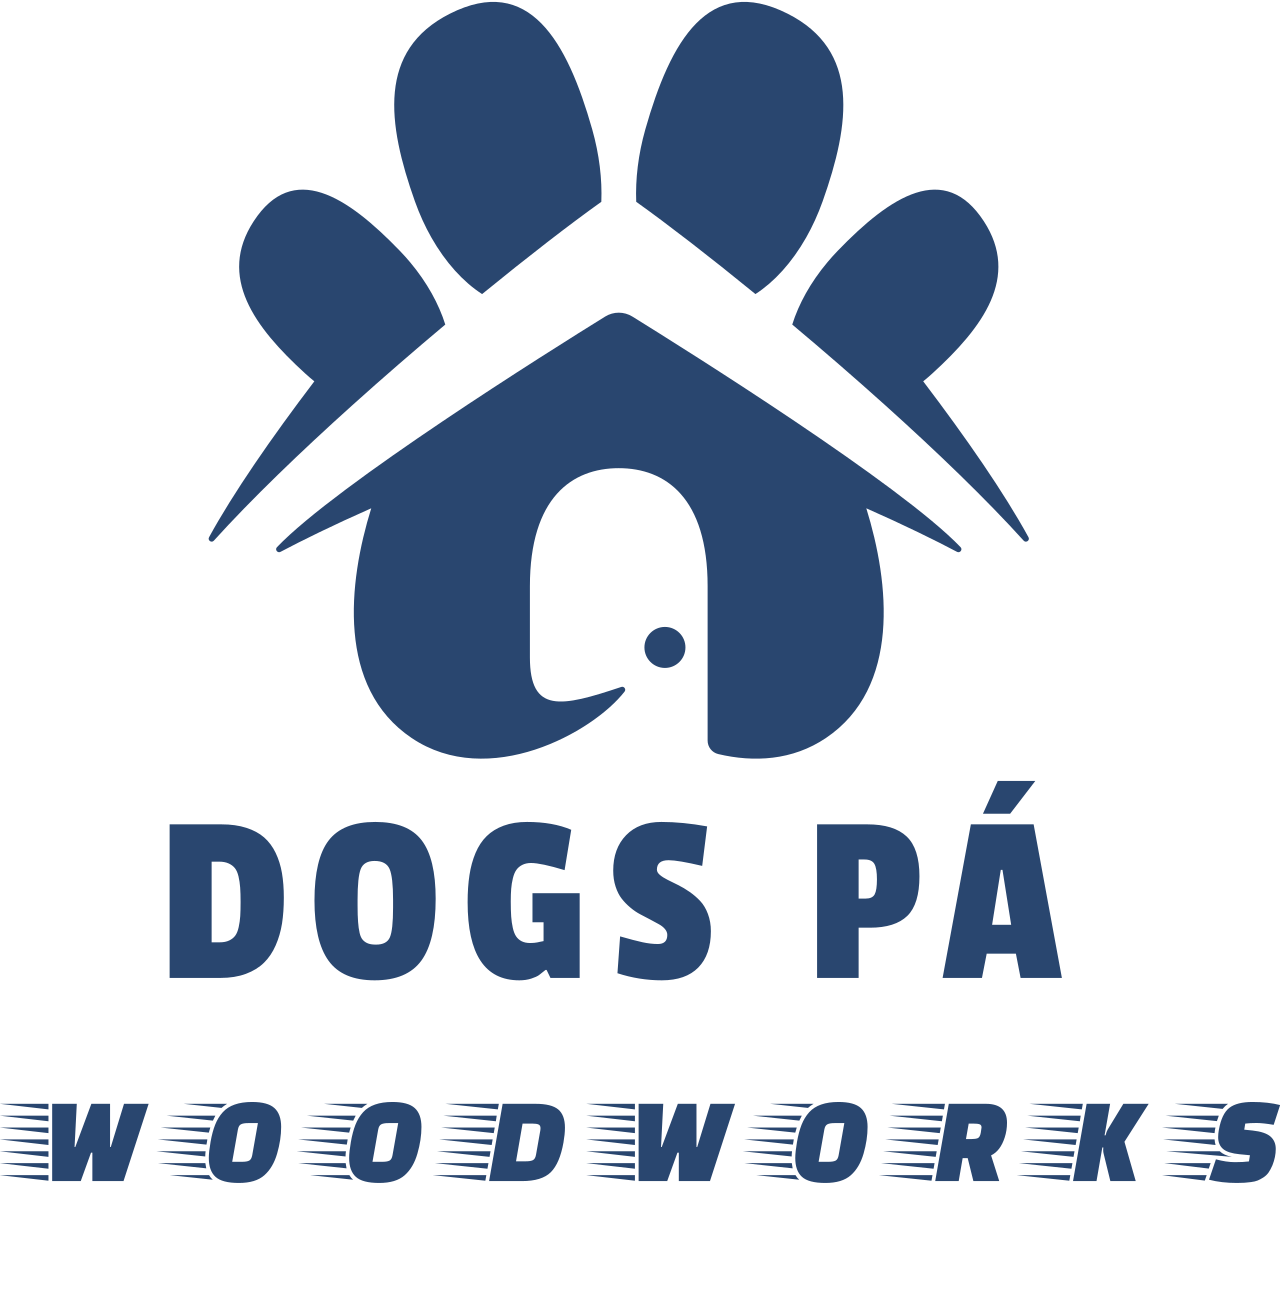 Dogs Pá Woodworks's web page